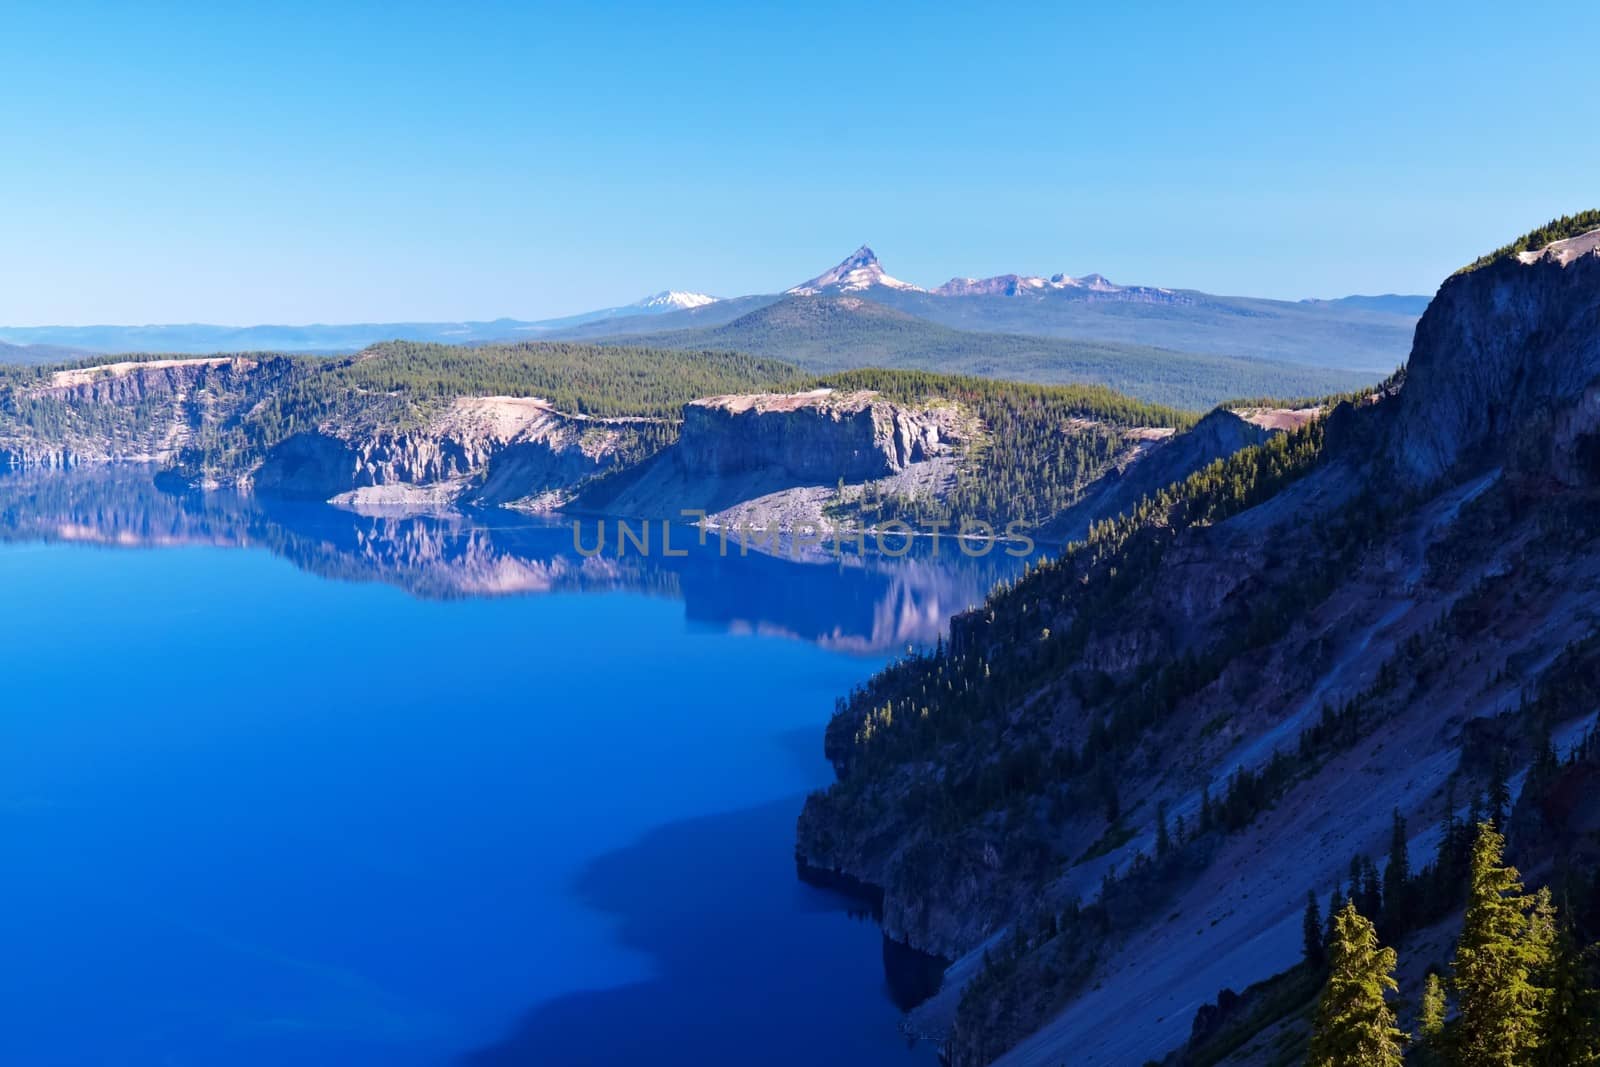 Crater Lake by LoonChild